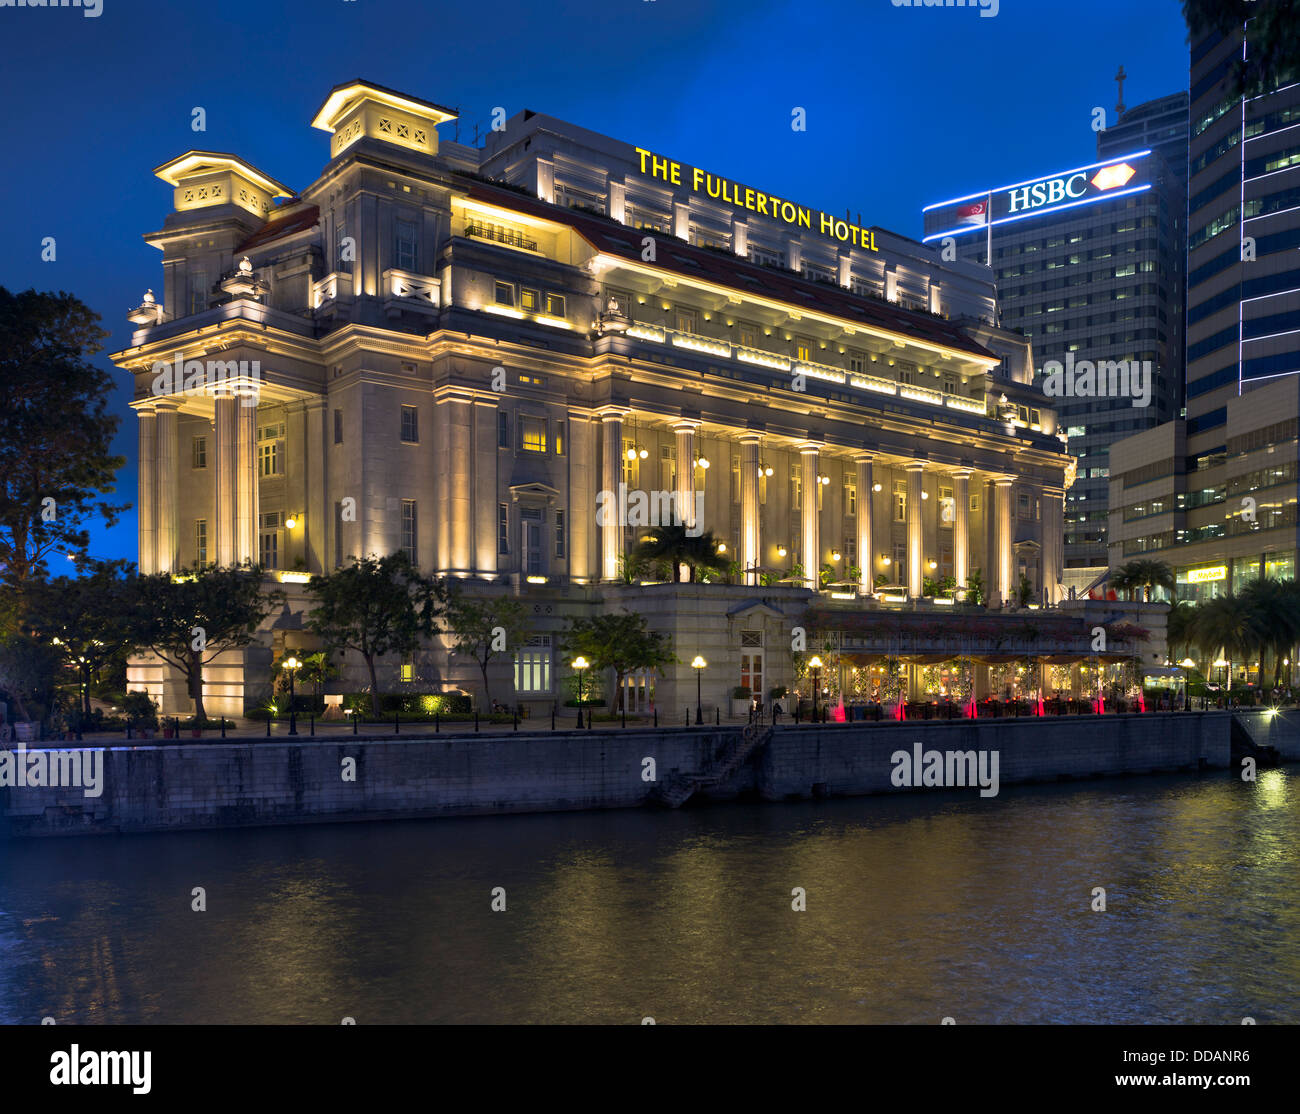 dh River Singapore DOWNTOWN CORE SINGAPORE The Fullerton Hotel building evening light floodlit hotels Stock Photo